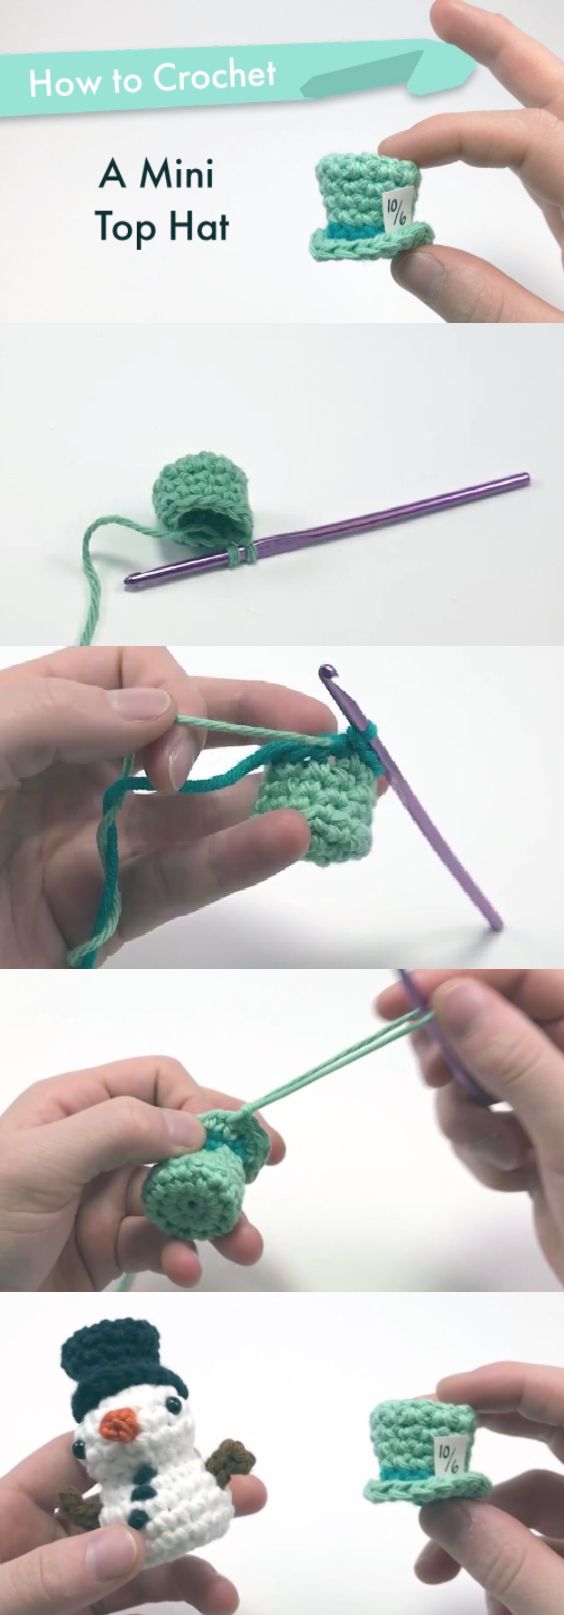 How To Crochet A Mini Top Hat